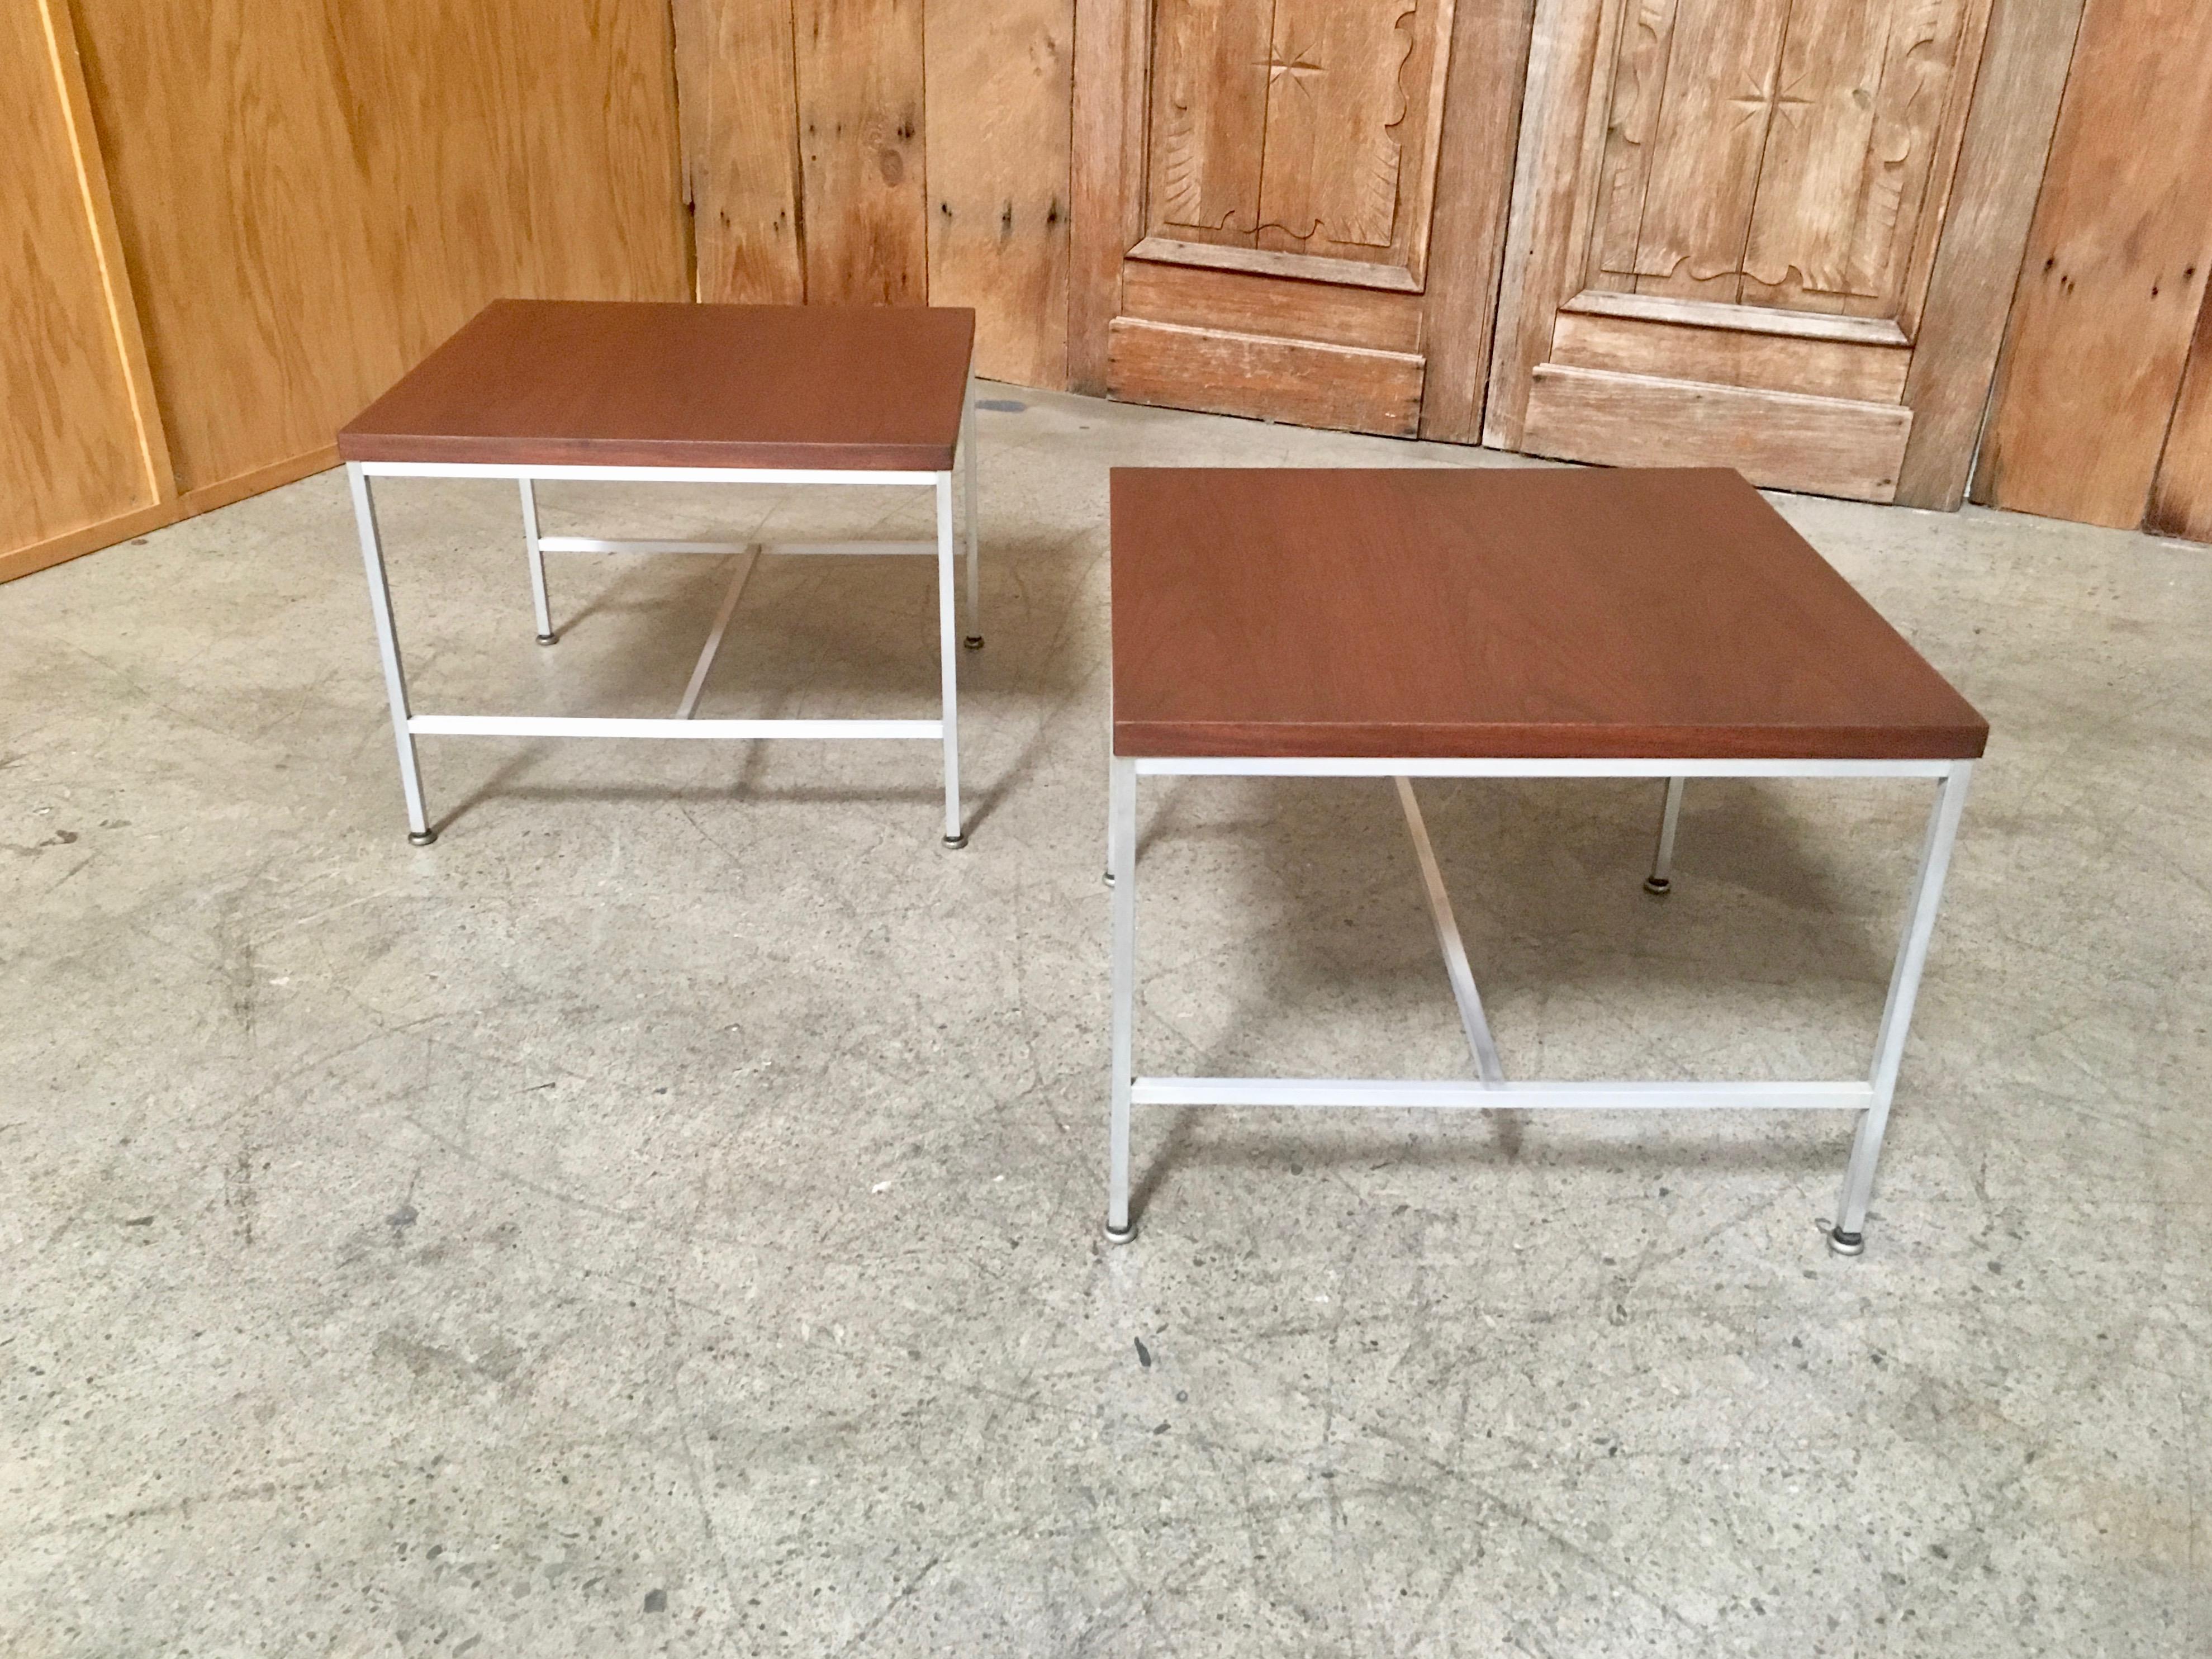 A pair of walnut tops with aluminium base side tables from the Erwin collection designed by Paul McCobb for Calvin furniture.